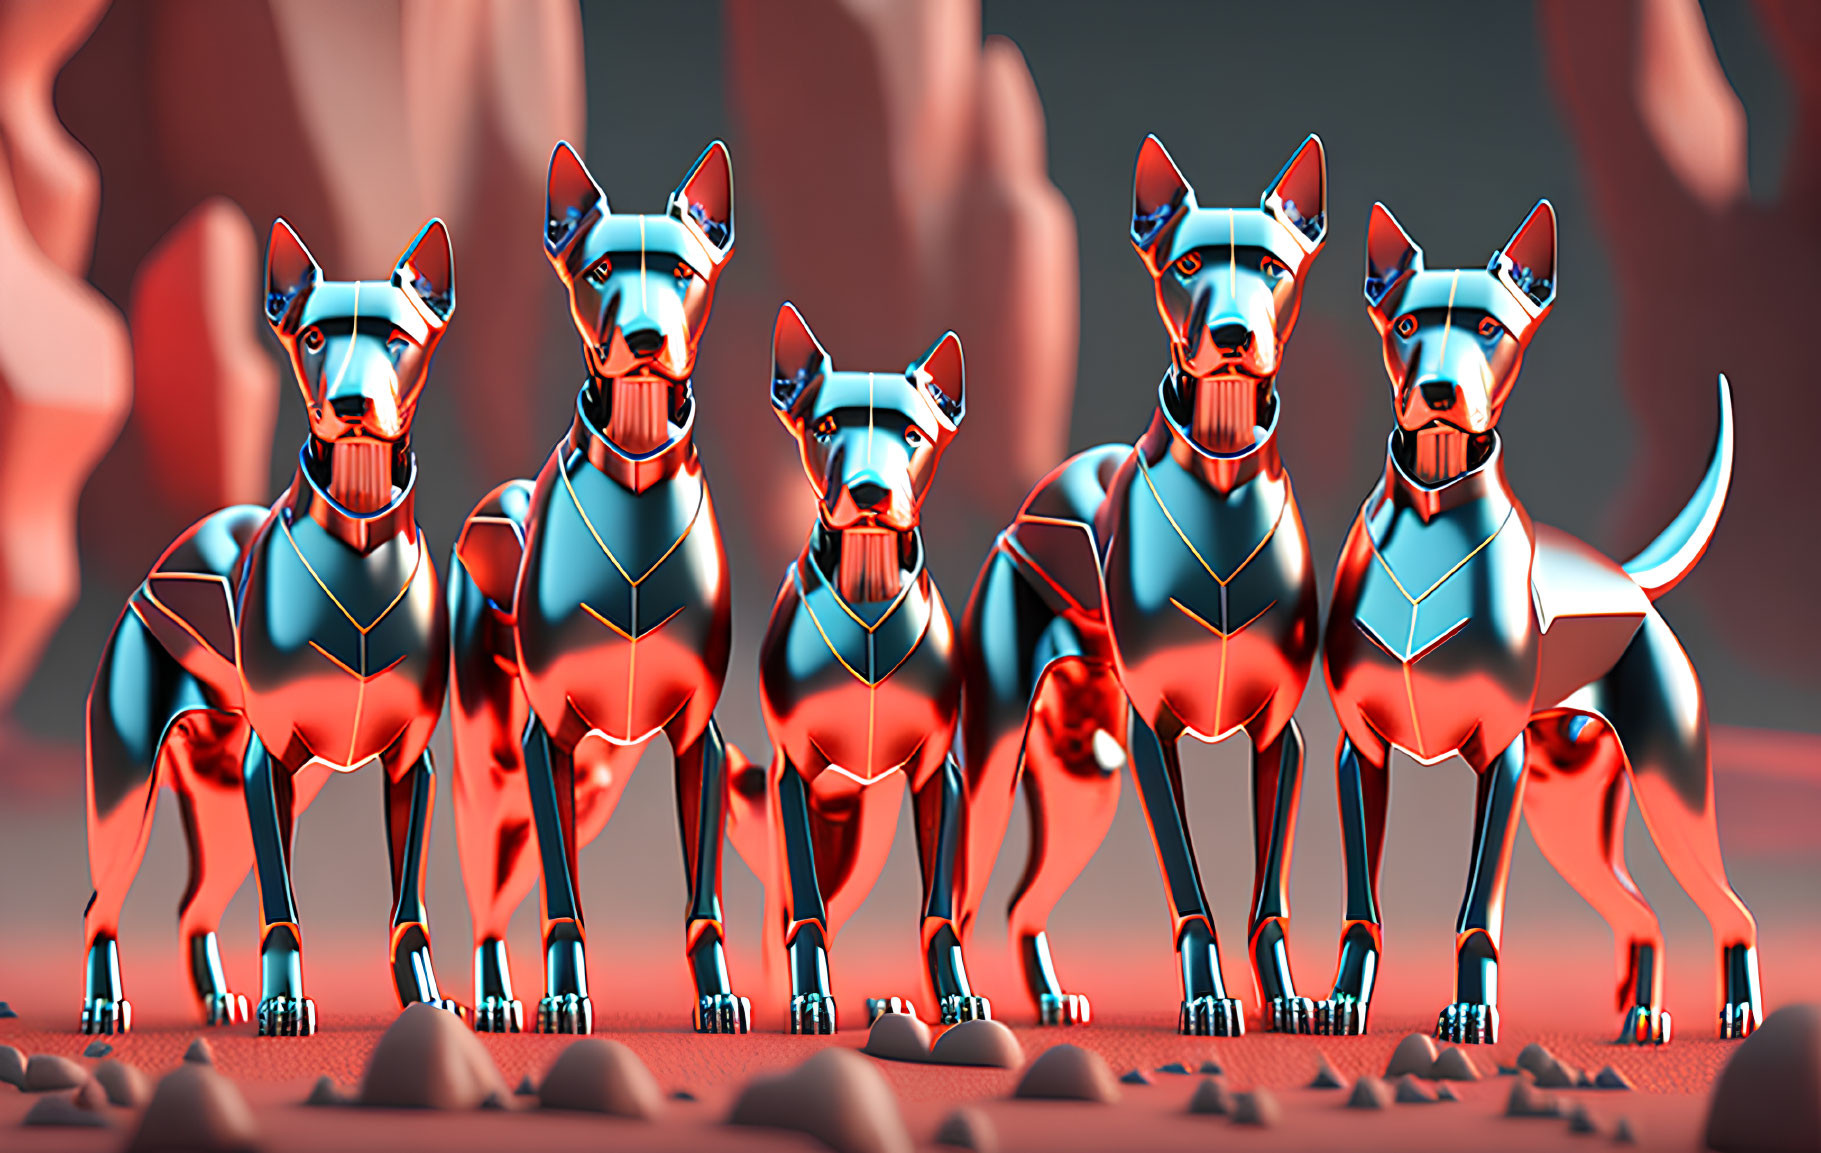 Five stylized robotic dogs in blue and silver against red rocky backdrop